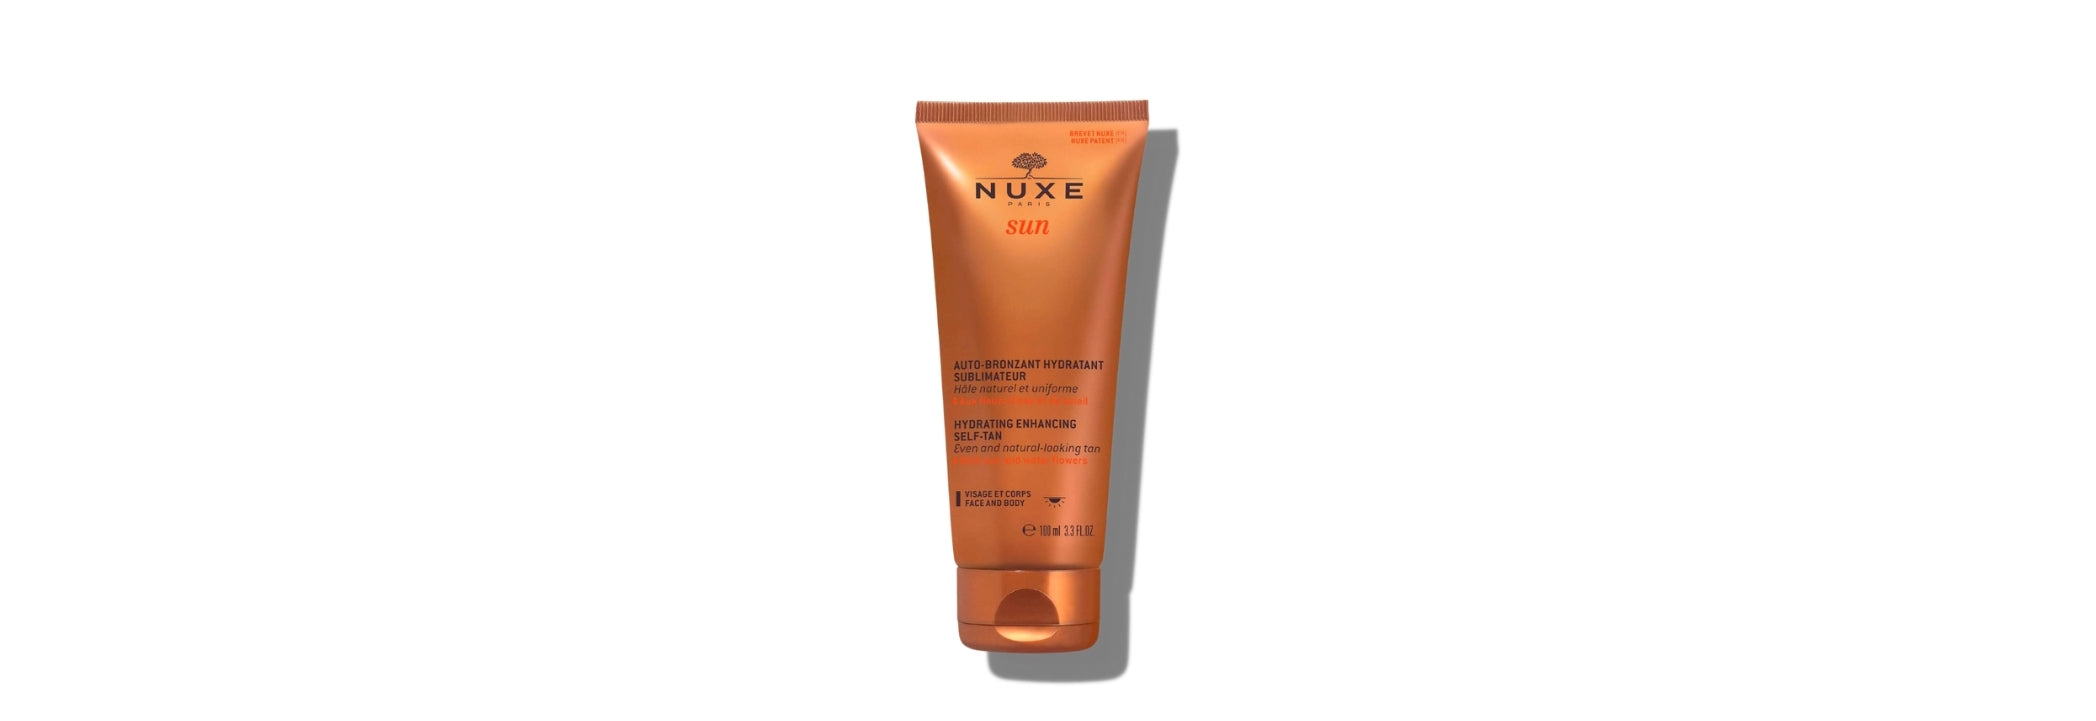 Nuxe, tanning, lotion